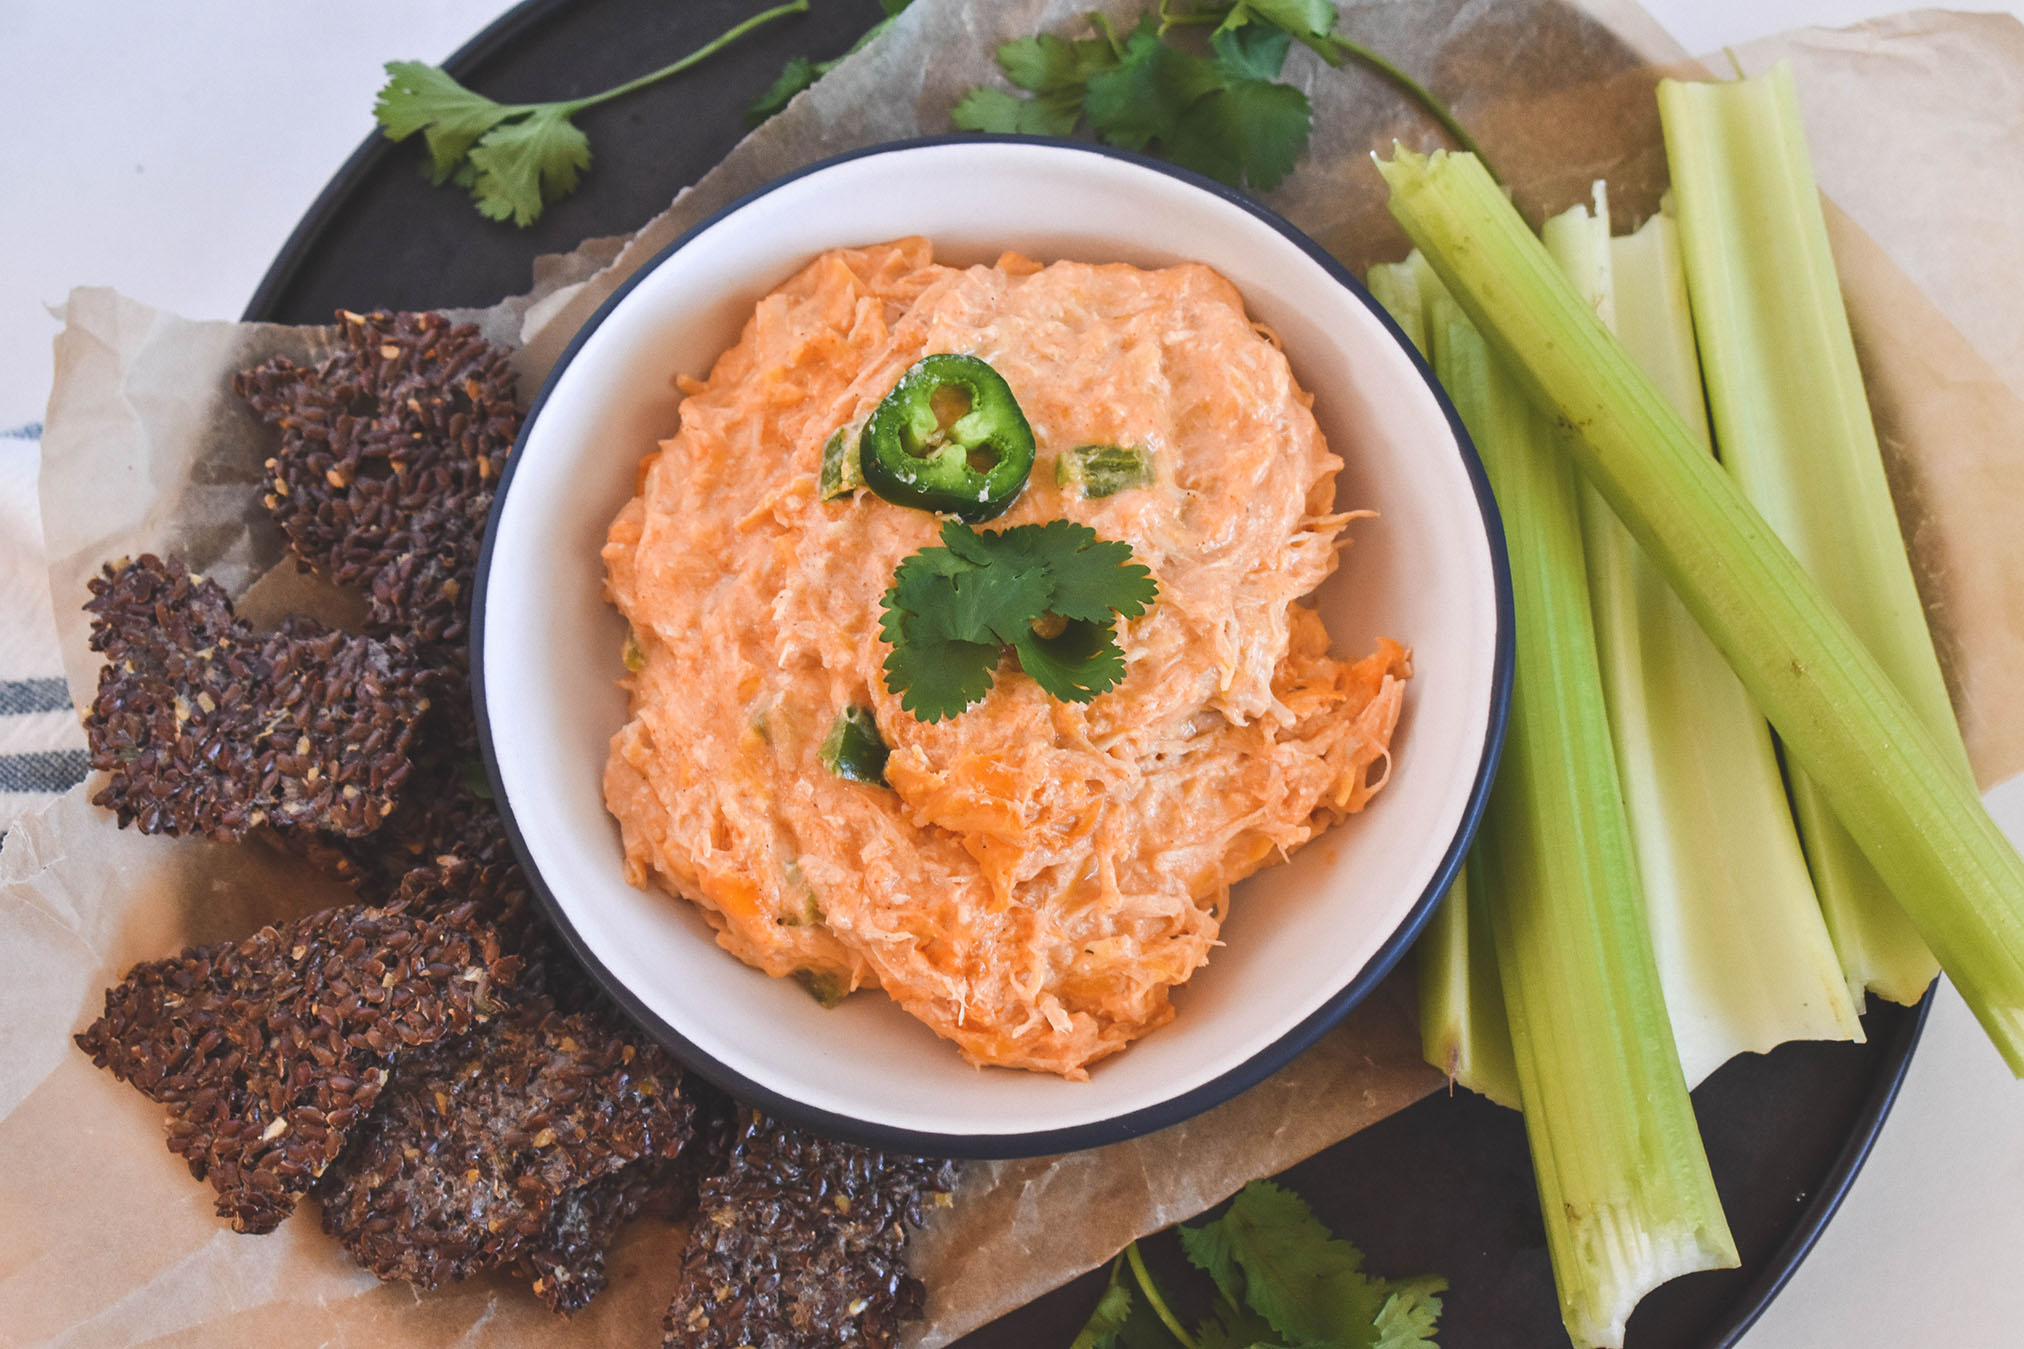 Buffalo Chicken dip in a white bowl sitting on parchment paper with celery sticks and flax crackers on the side.